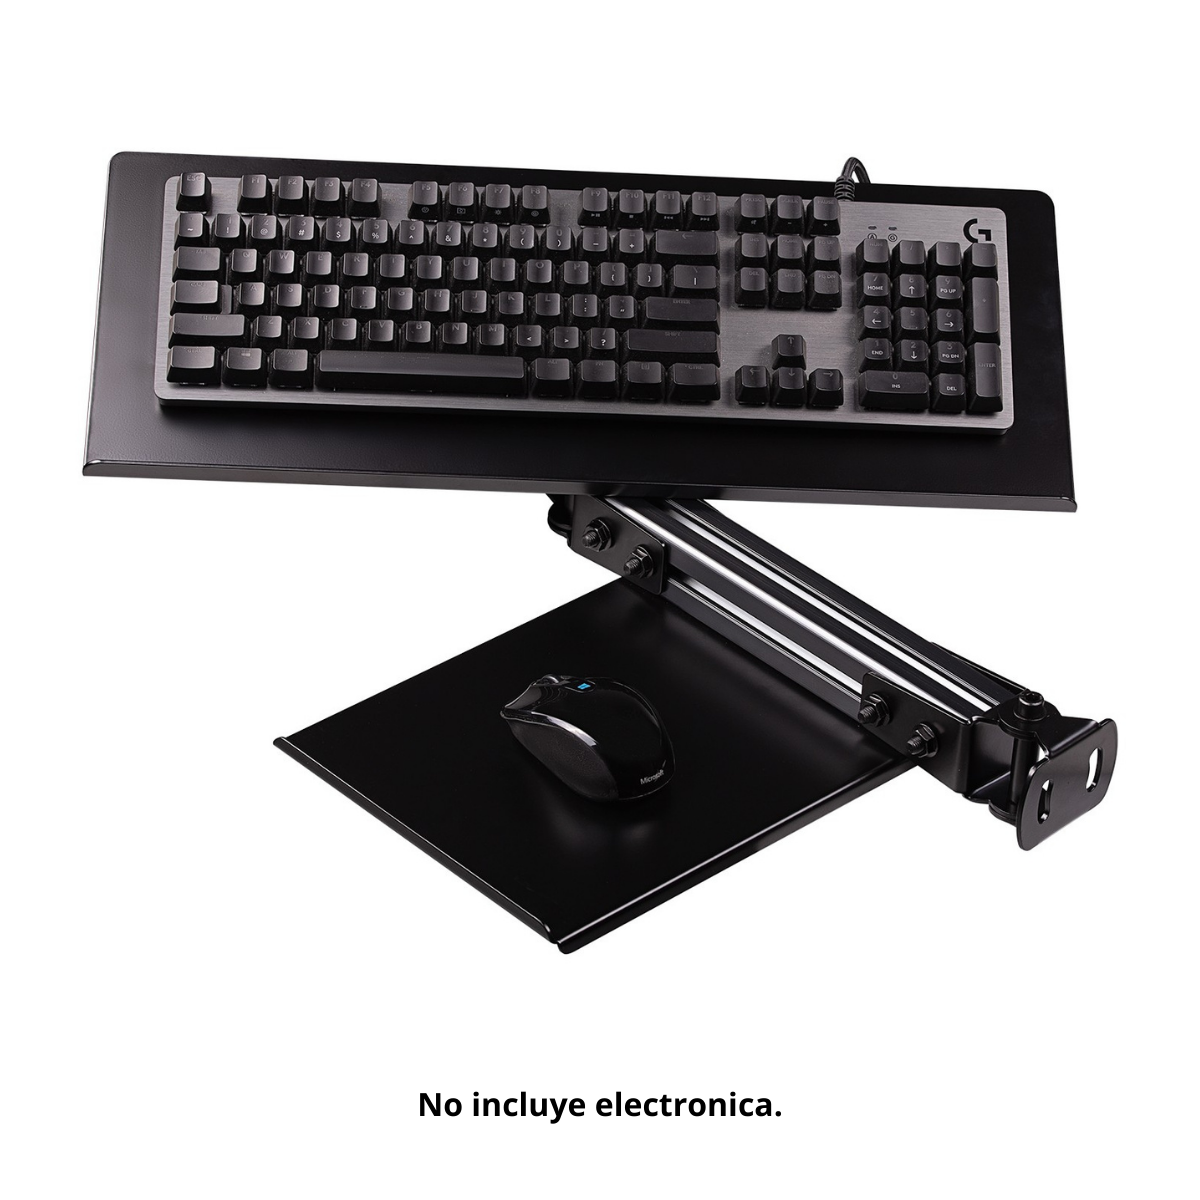 TRAY LEVEL ELITE NEXT & KEYBOARD NLR-E010 RACING MOUSE